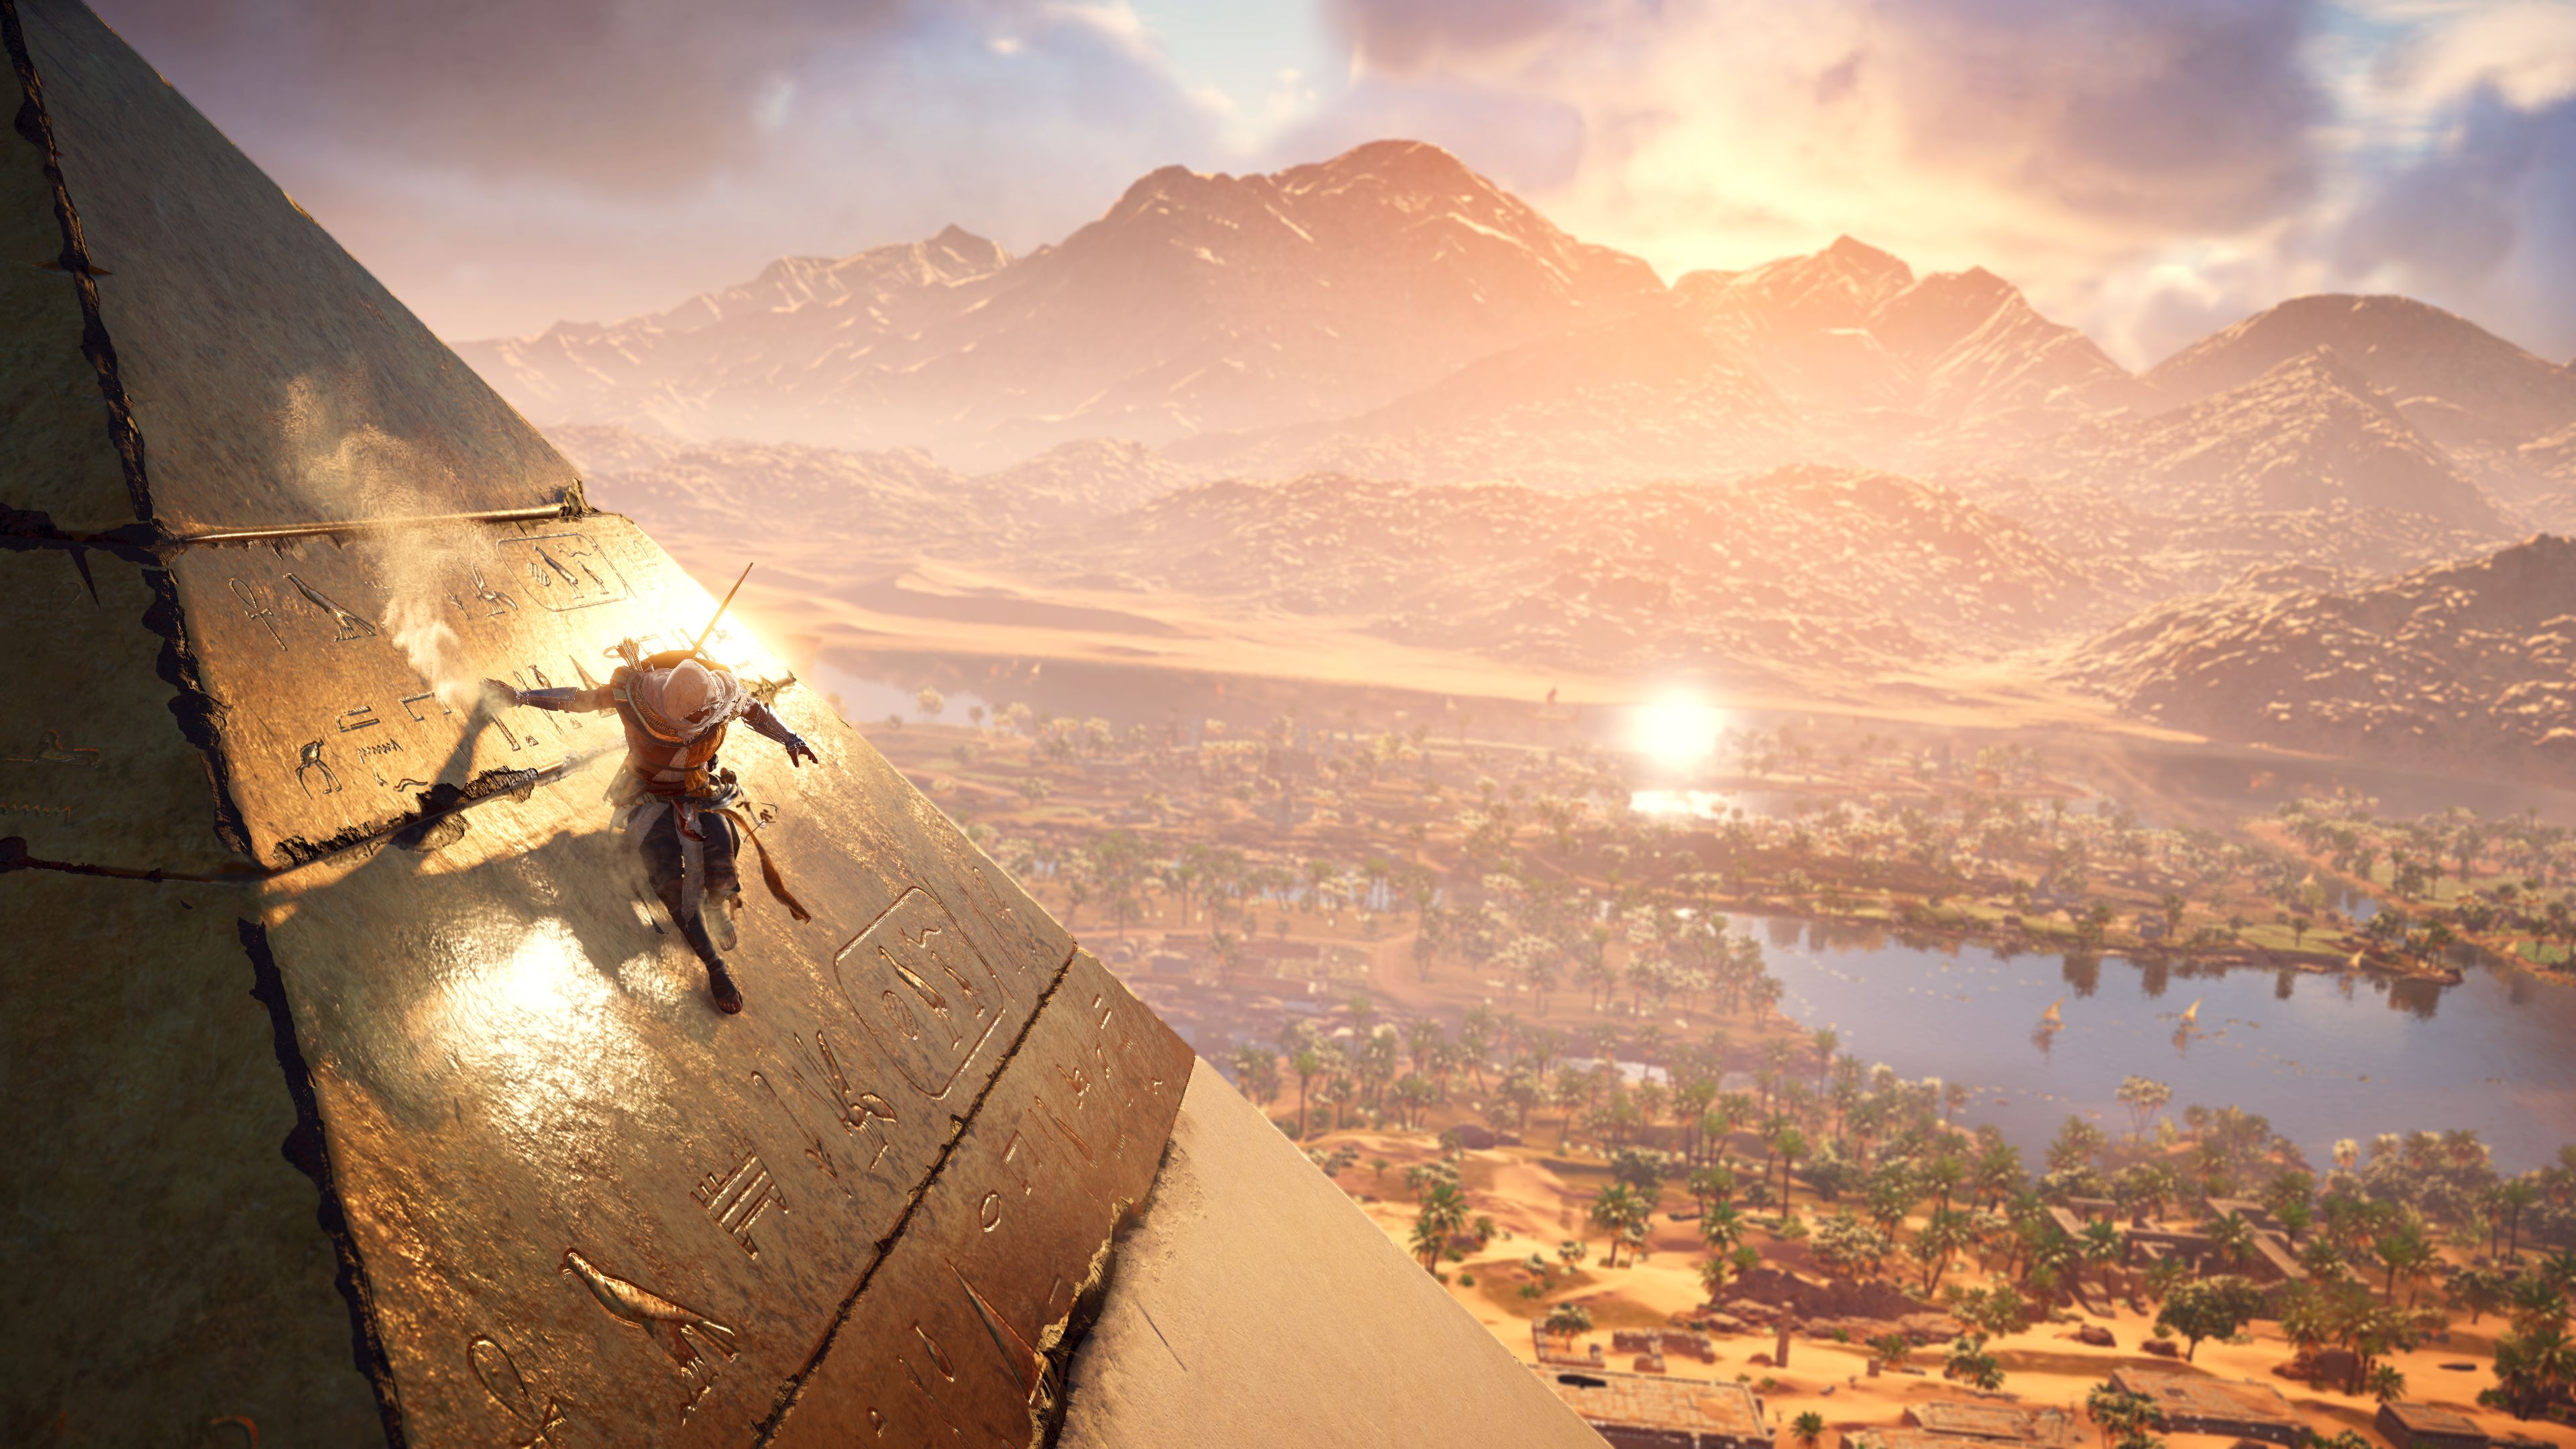 bayek of siwa, assassin's creed, video game, assassin's creed origins Phone Background